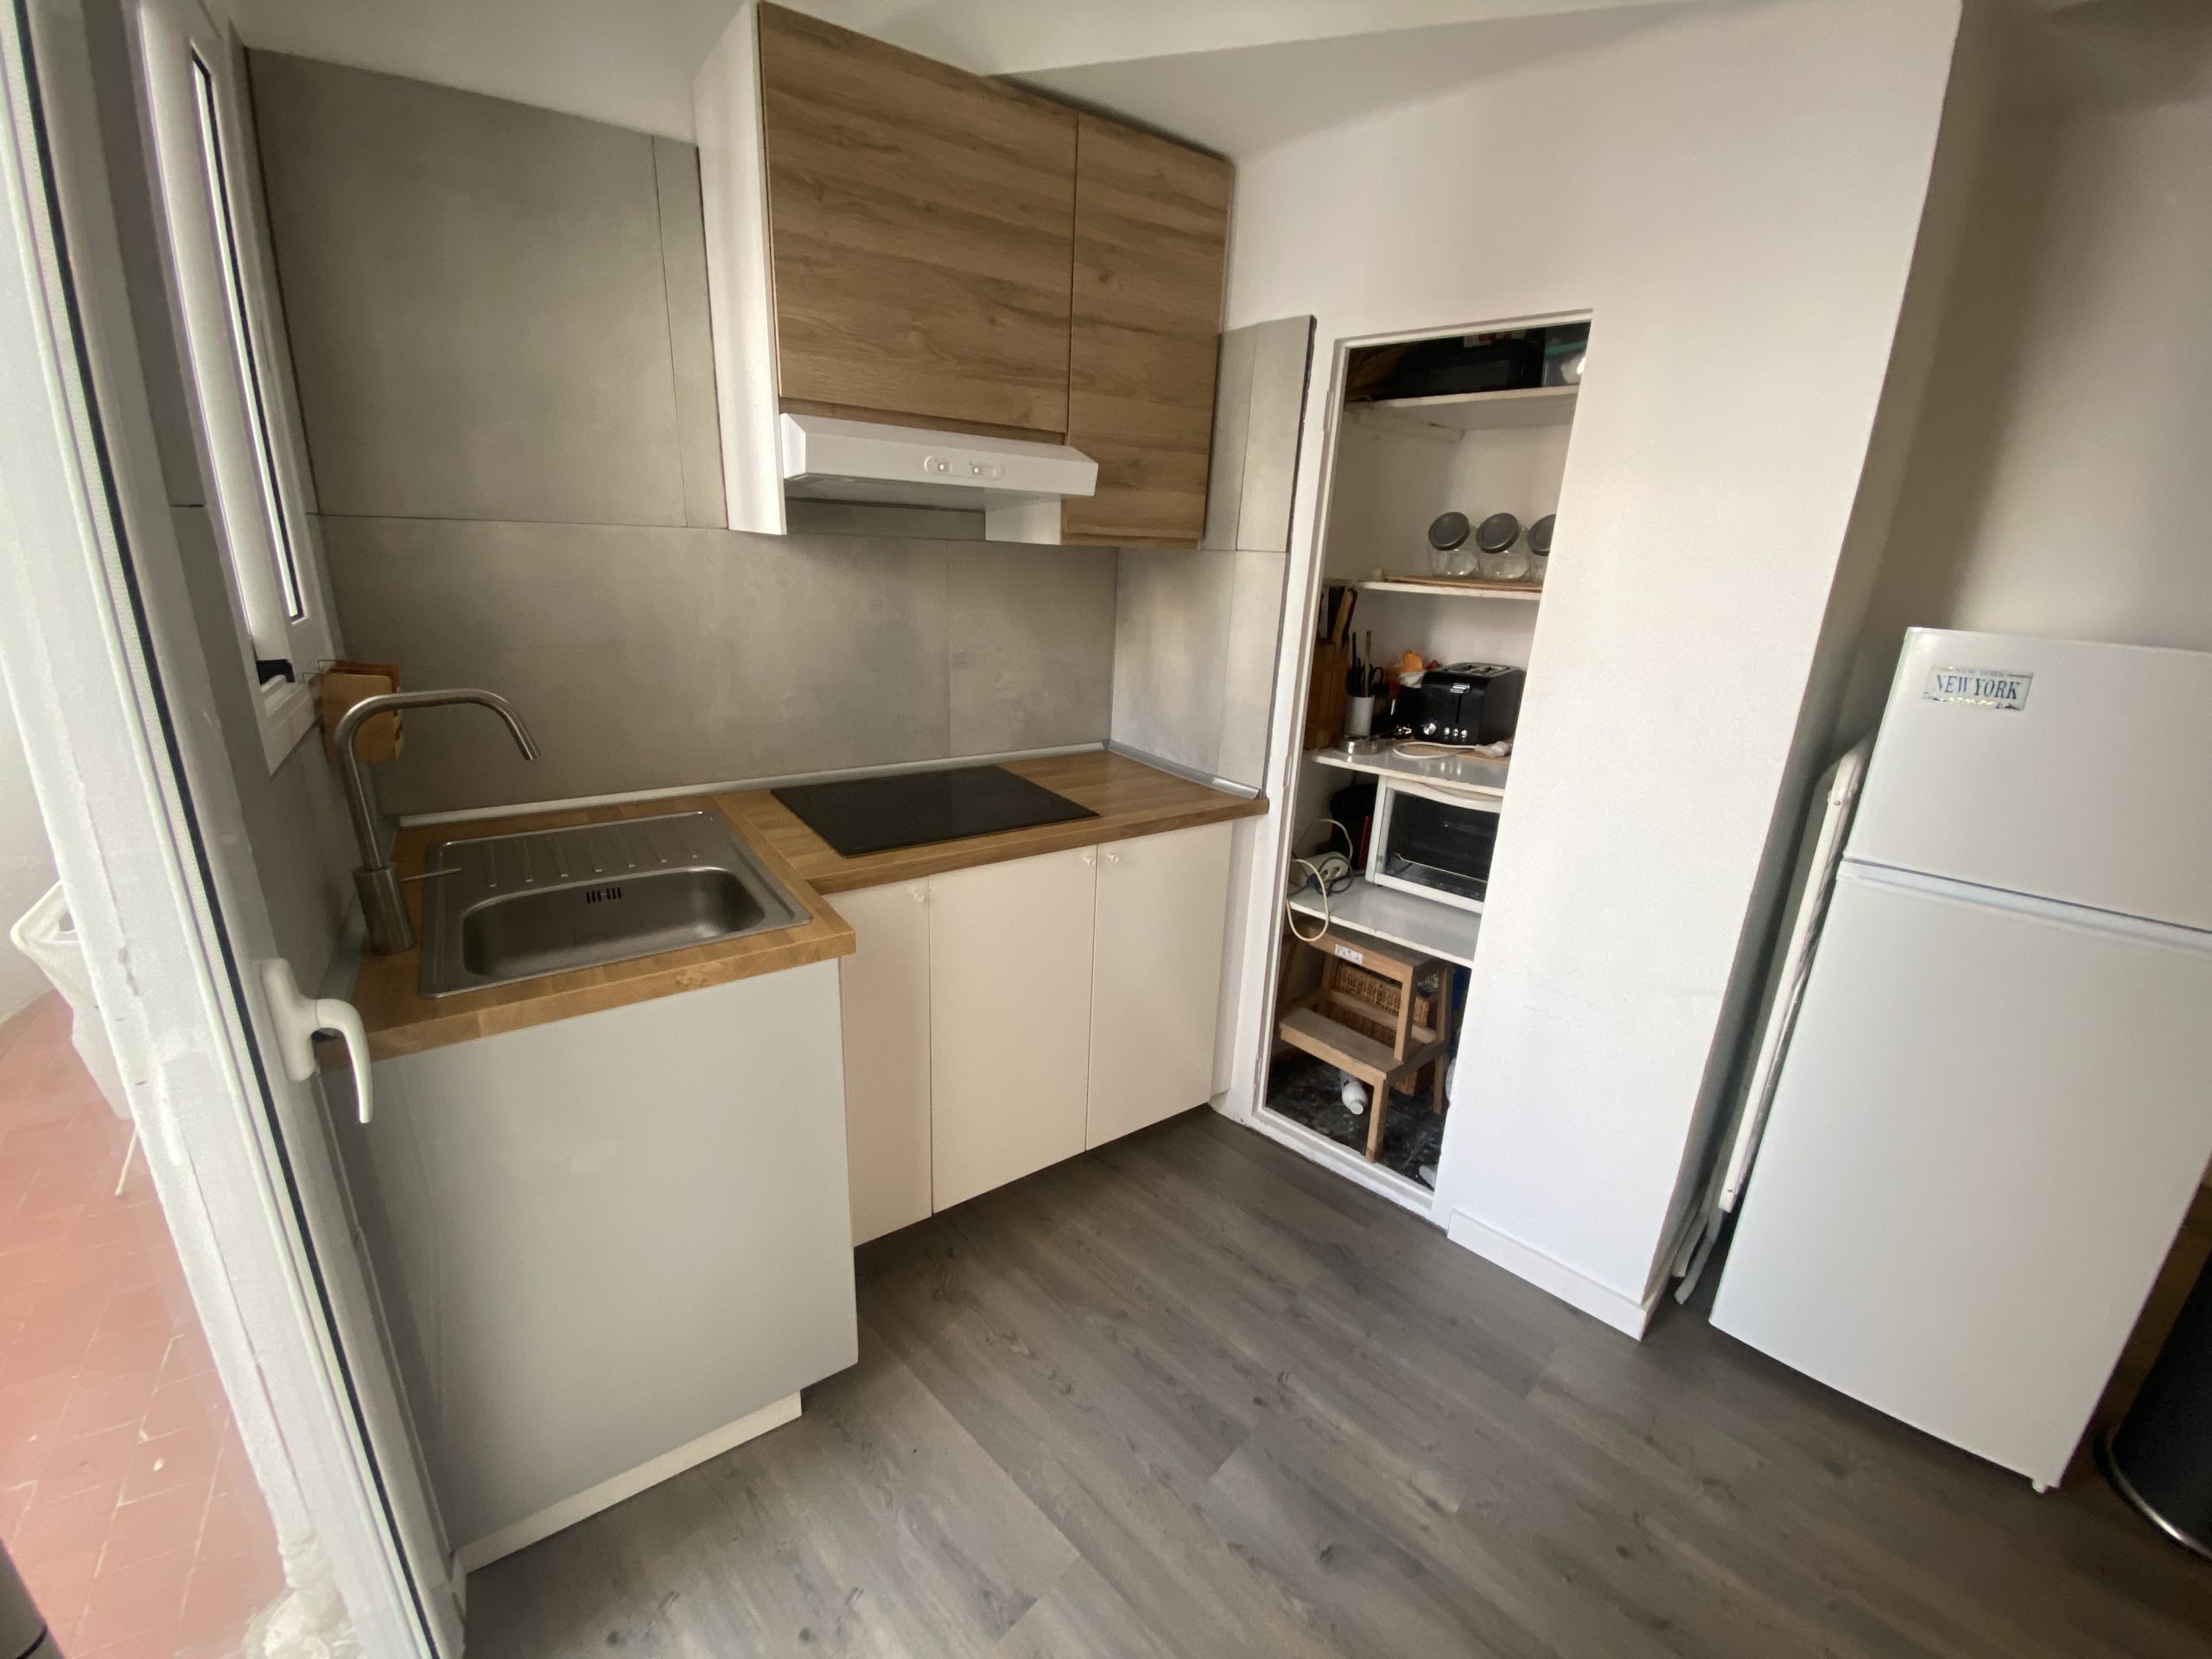 Apartment for rent in Valencia -Kitchen